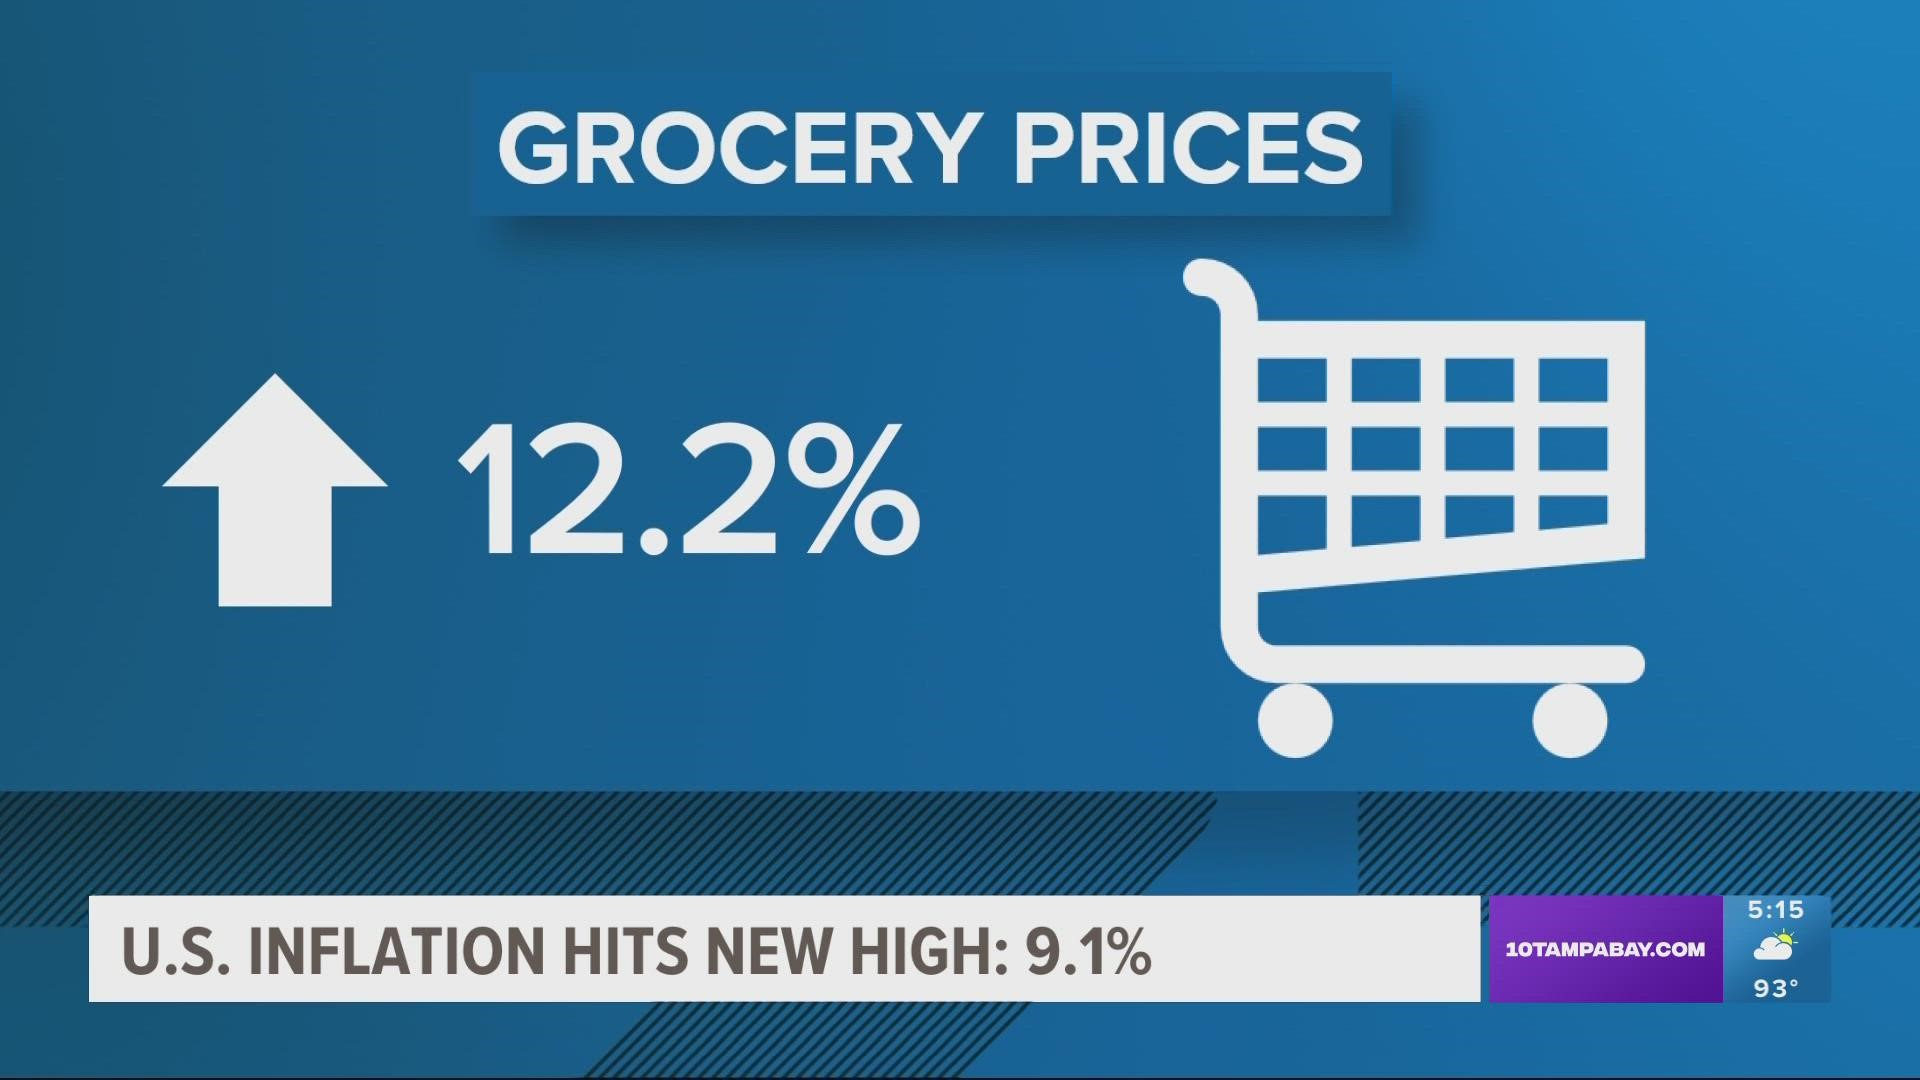 Consumer prices soared 9.1% compared with a year earlier, the biggest yearly increase since 1981.